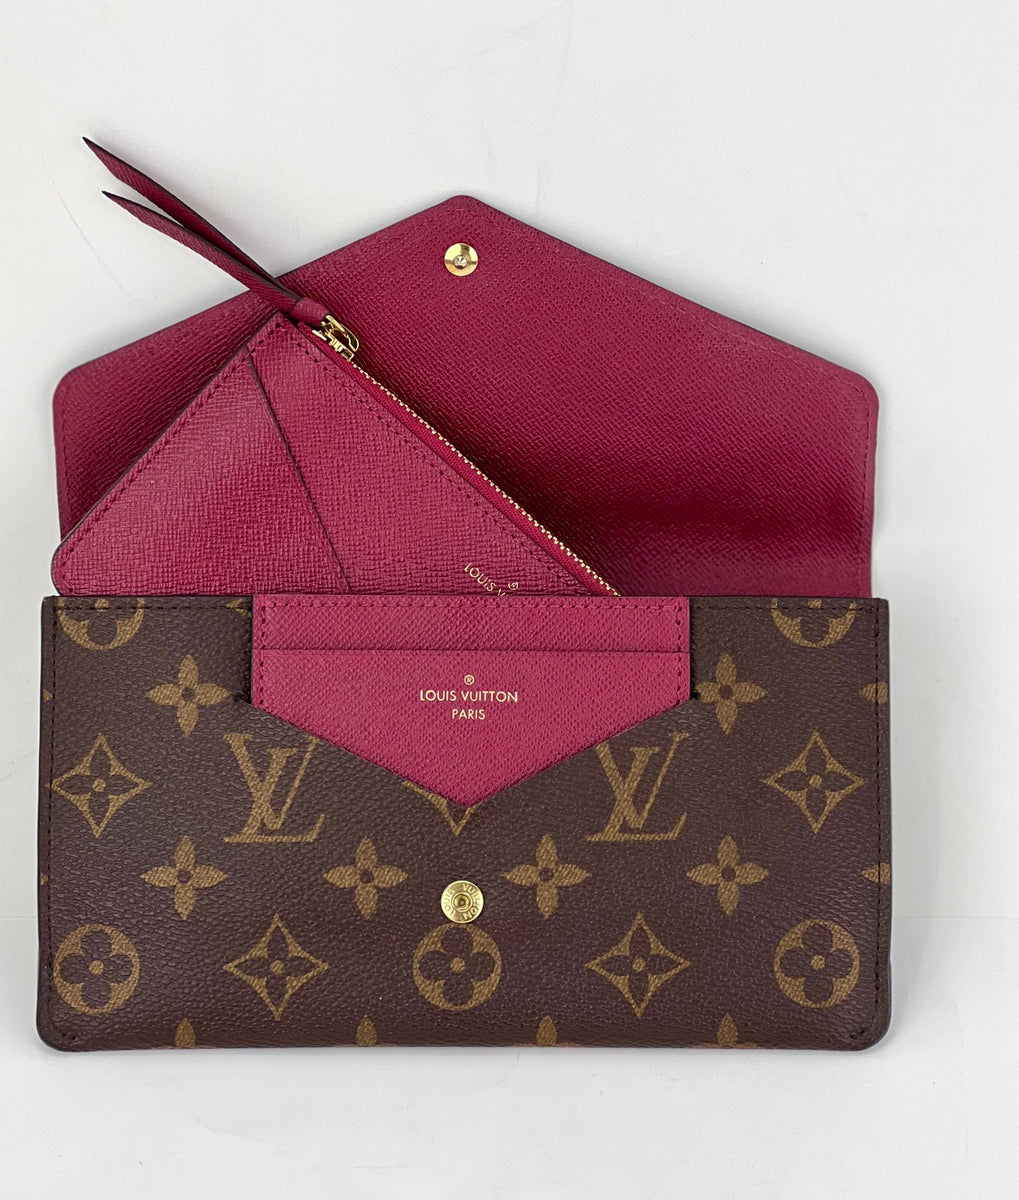 Louis Vuitton - Authenticated Jeanne Wallet - Leather Brown Plain for Women, Very Good Condition